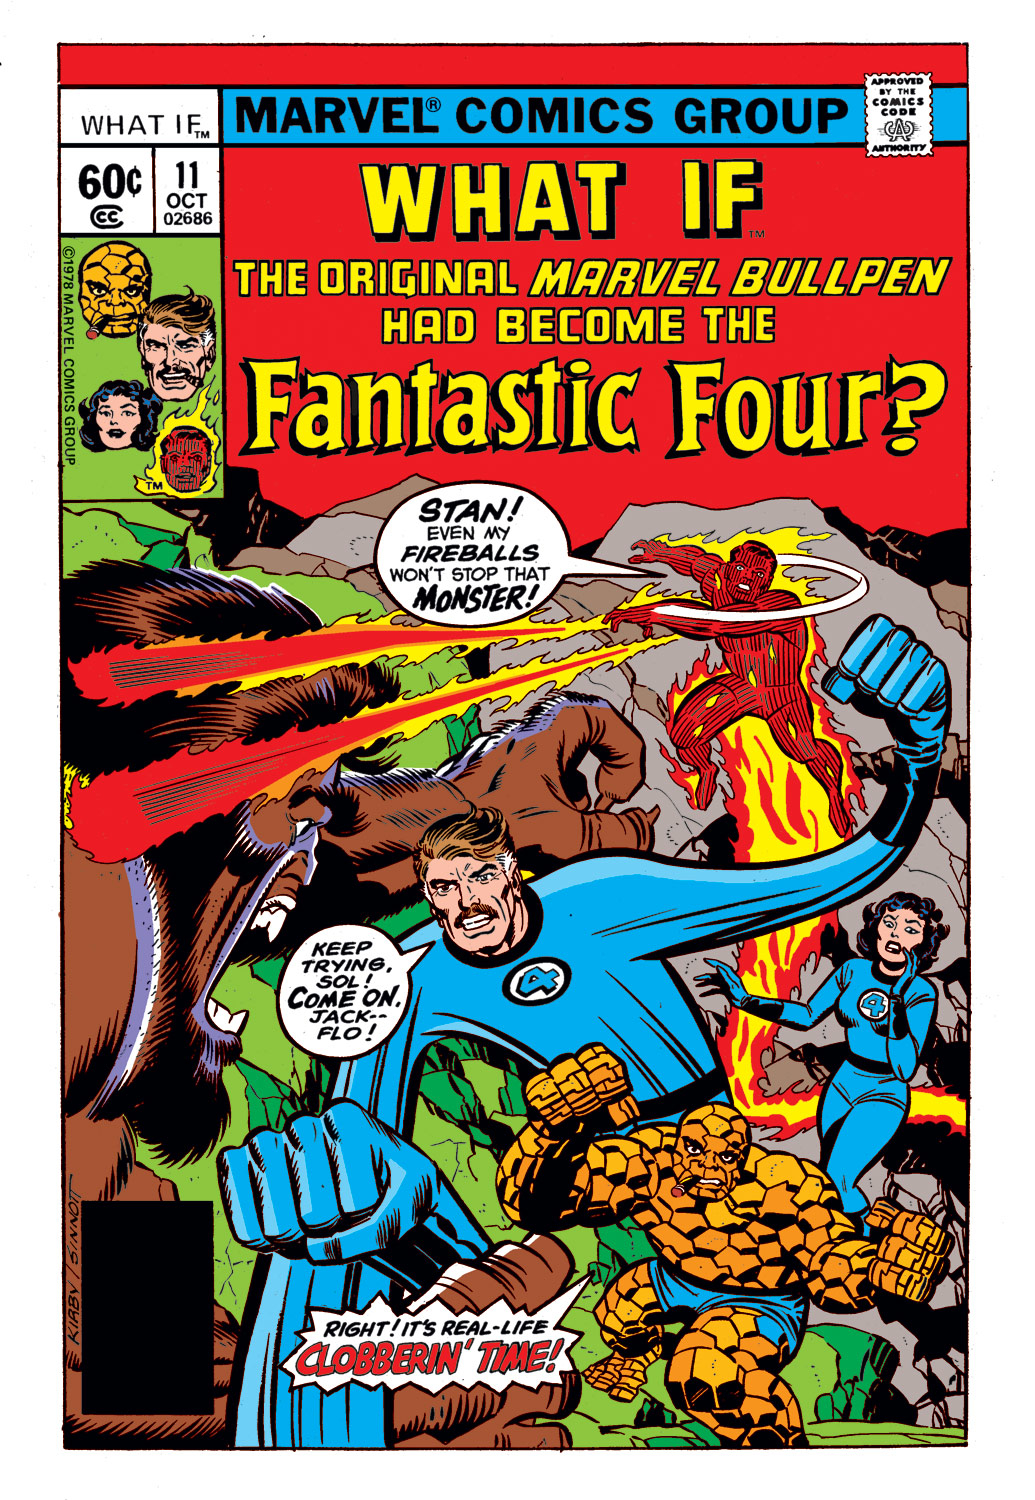 What If? (1977) issue 11 - The original marvel bullpen had become the Fantastic Four - Page 1